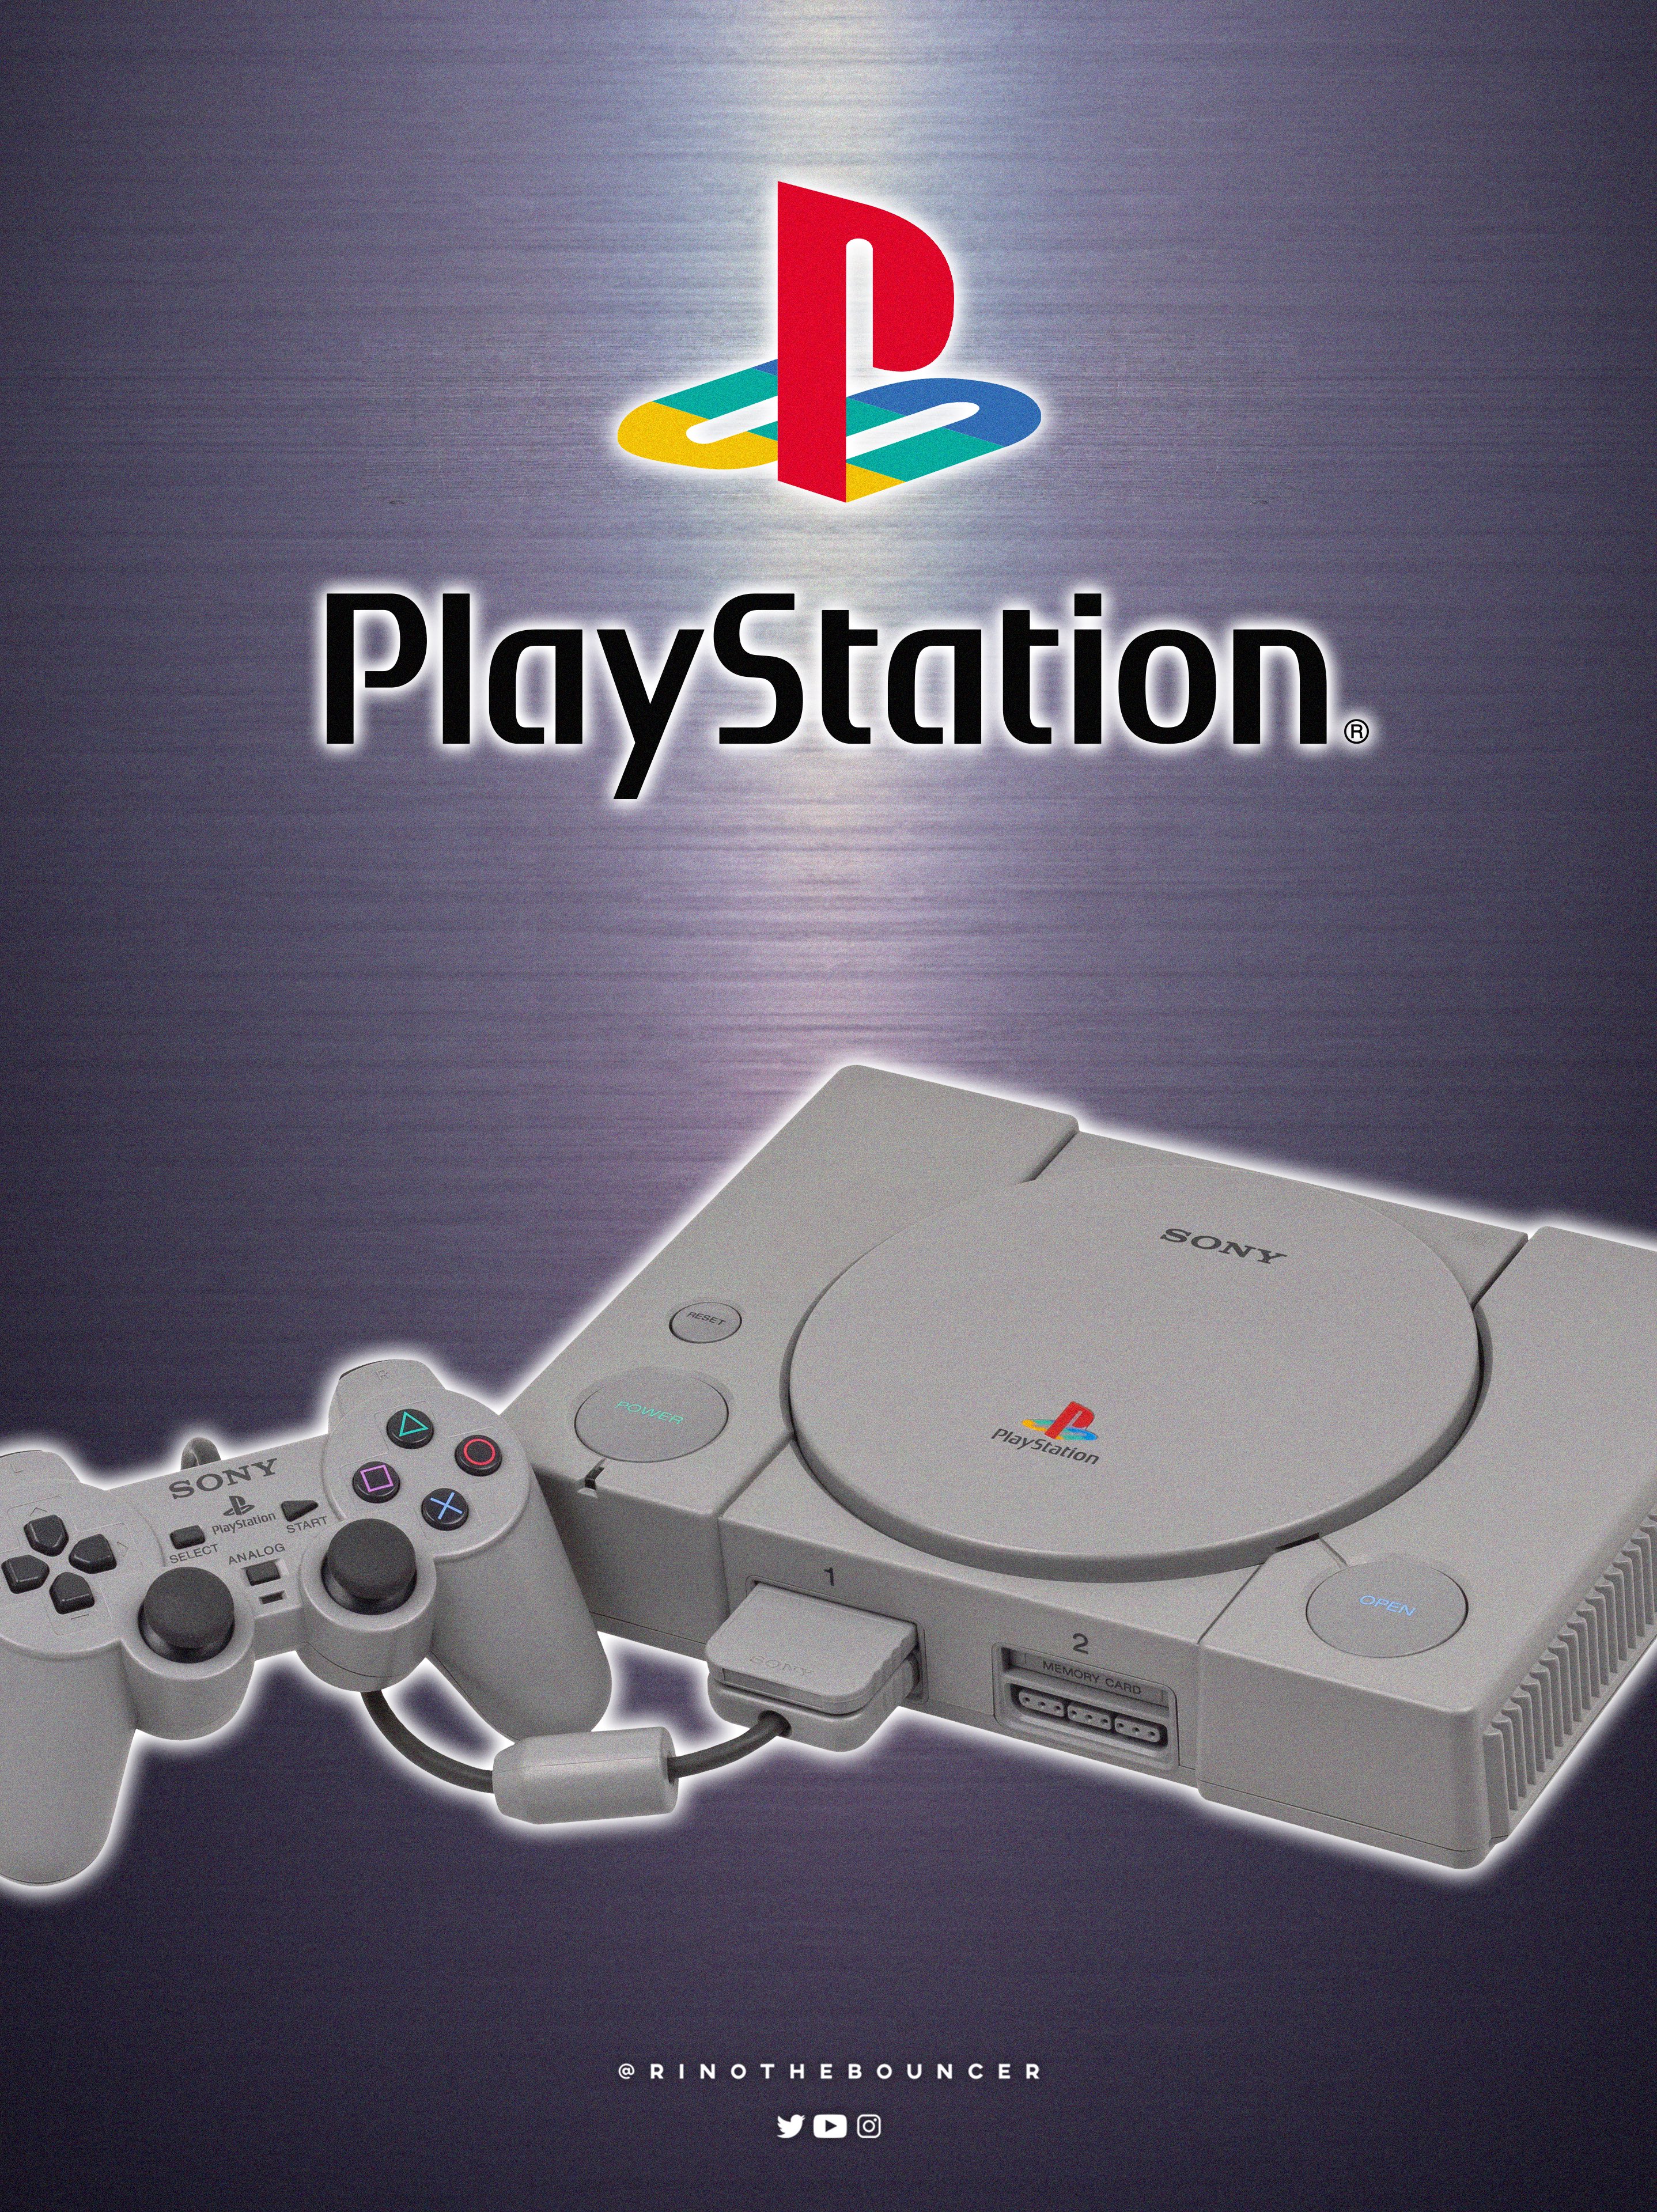 Rino on Twitter: "What's the first game you of when you see the original #PlayStation?🚀 Let's go! #Gaming #retro_mode https://t.co/XS6RHRJ4tI" / Twitter